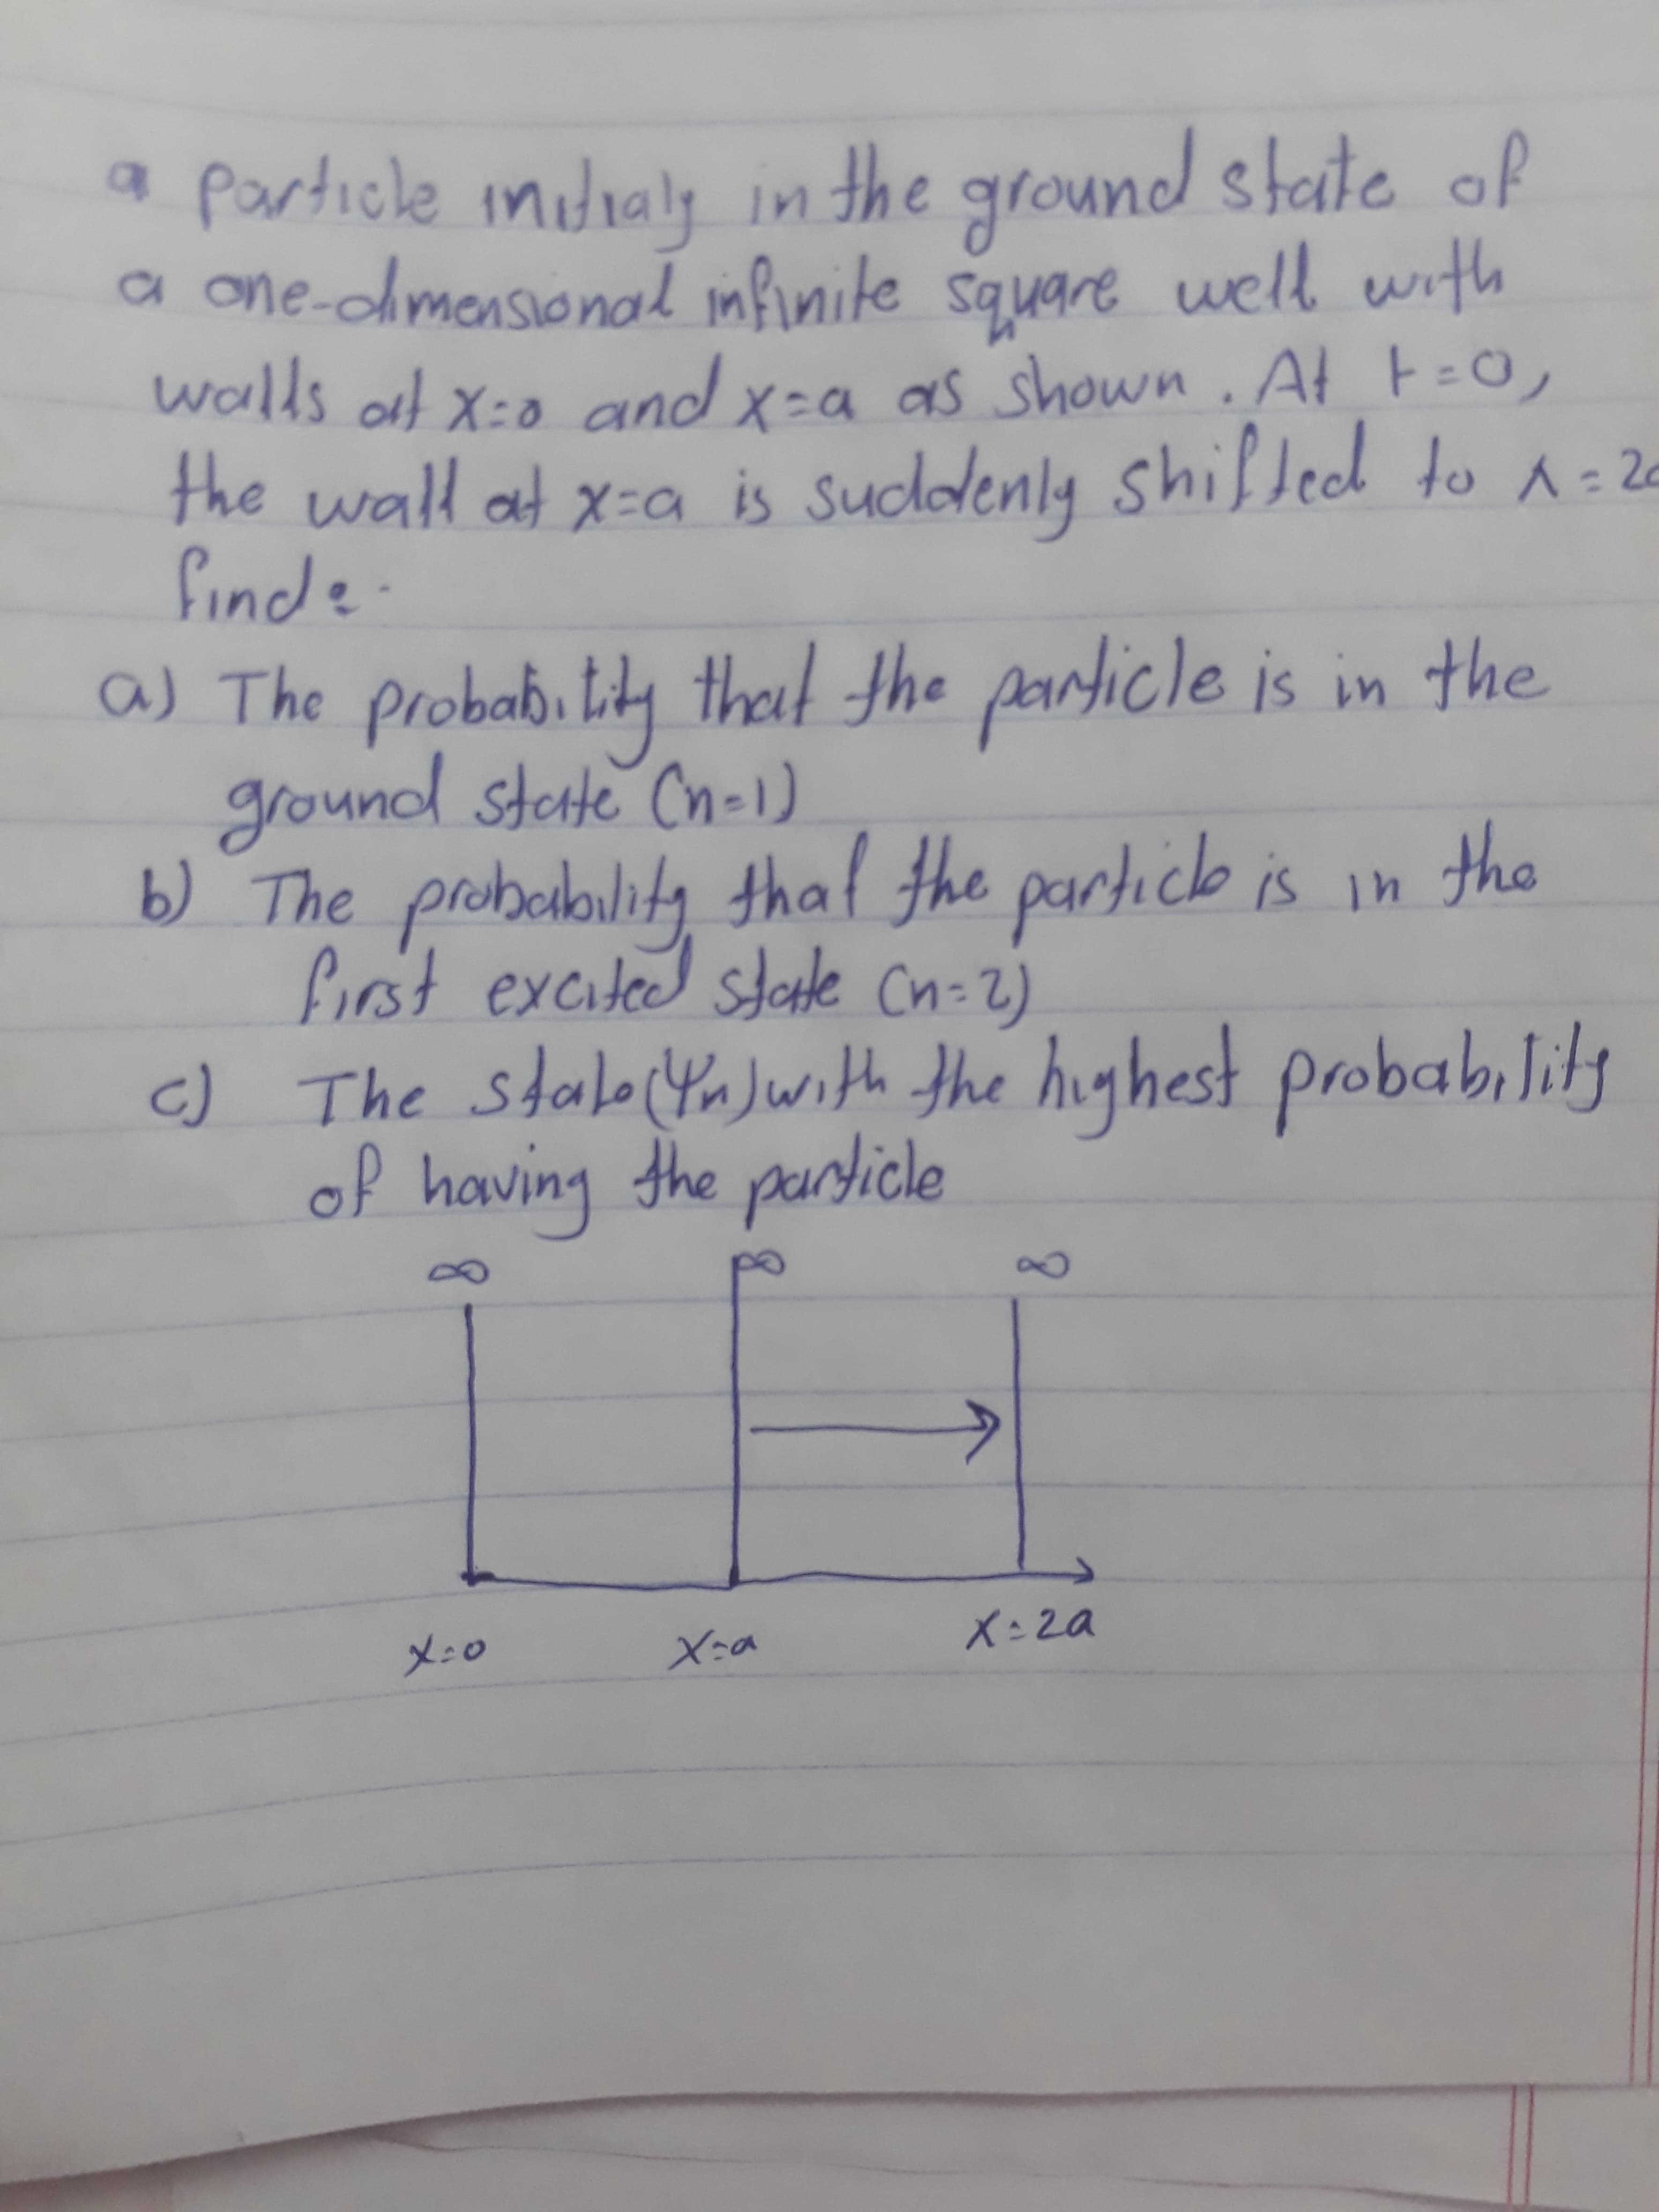 The probabi tiy theut the particle is in the
nd state Cn-1)
gro
The probak
first excited stete Cn=2)
0 The stale YnJwith the highest probability
of having the particle
ility partick is n
that the
the
